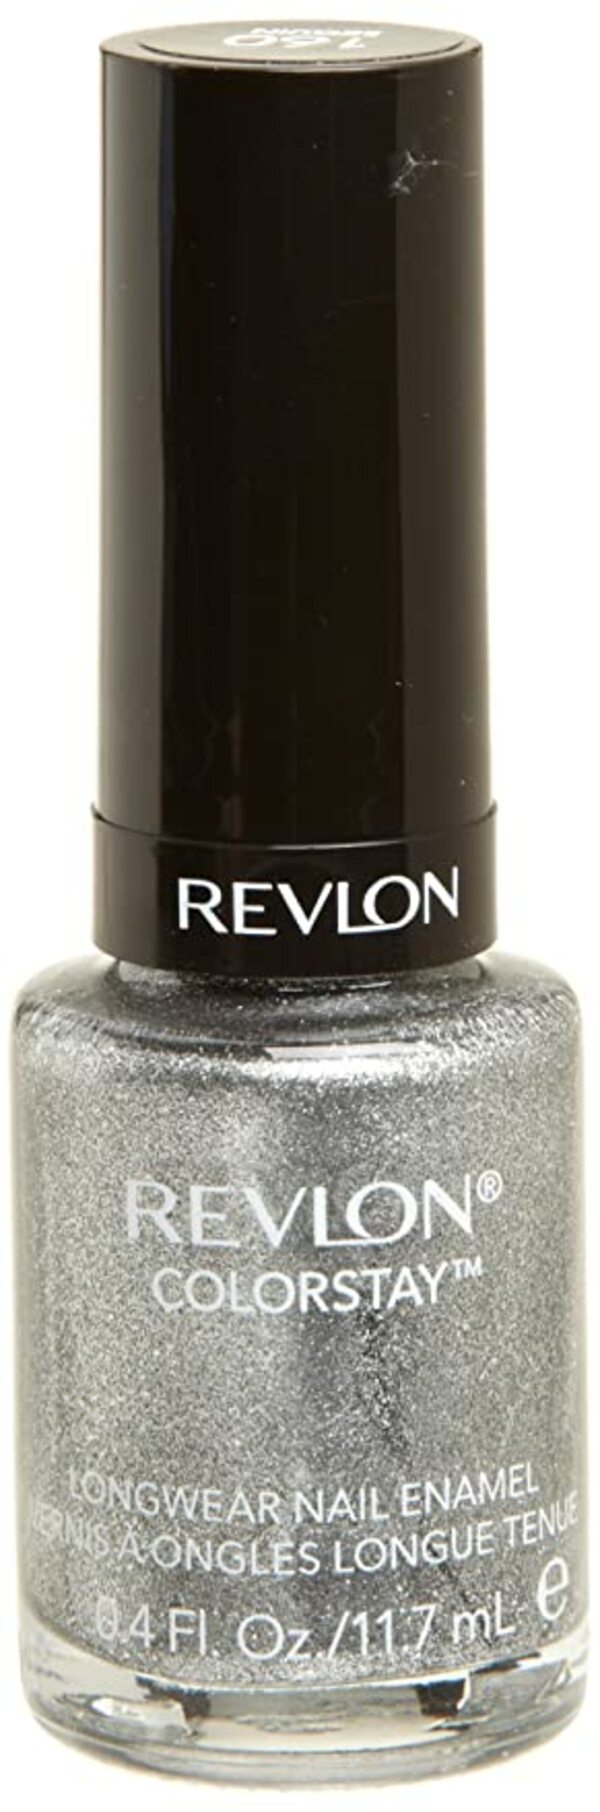 Nail polish swatch / manicure of shade Revlon Sequin